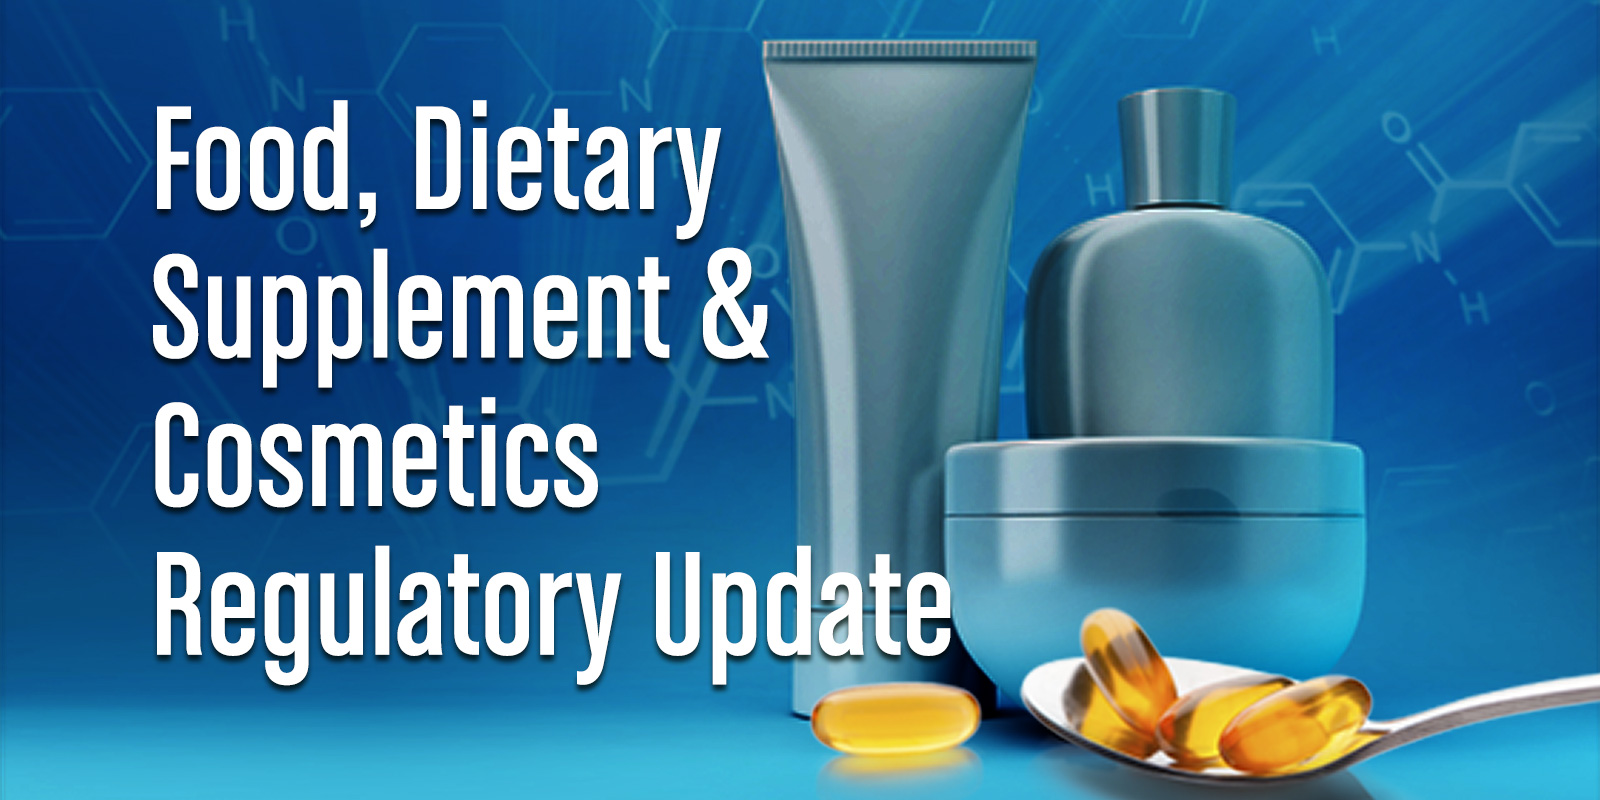 Food, Dietary Supplement & Cosmetics Update | Vol. IV, Issue 3